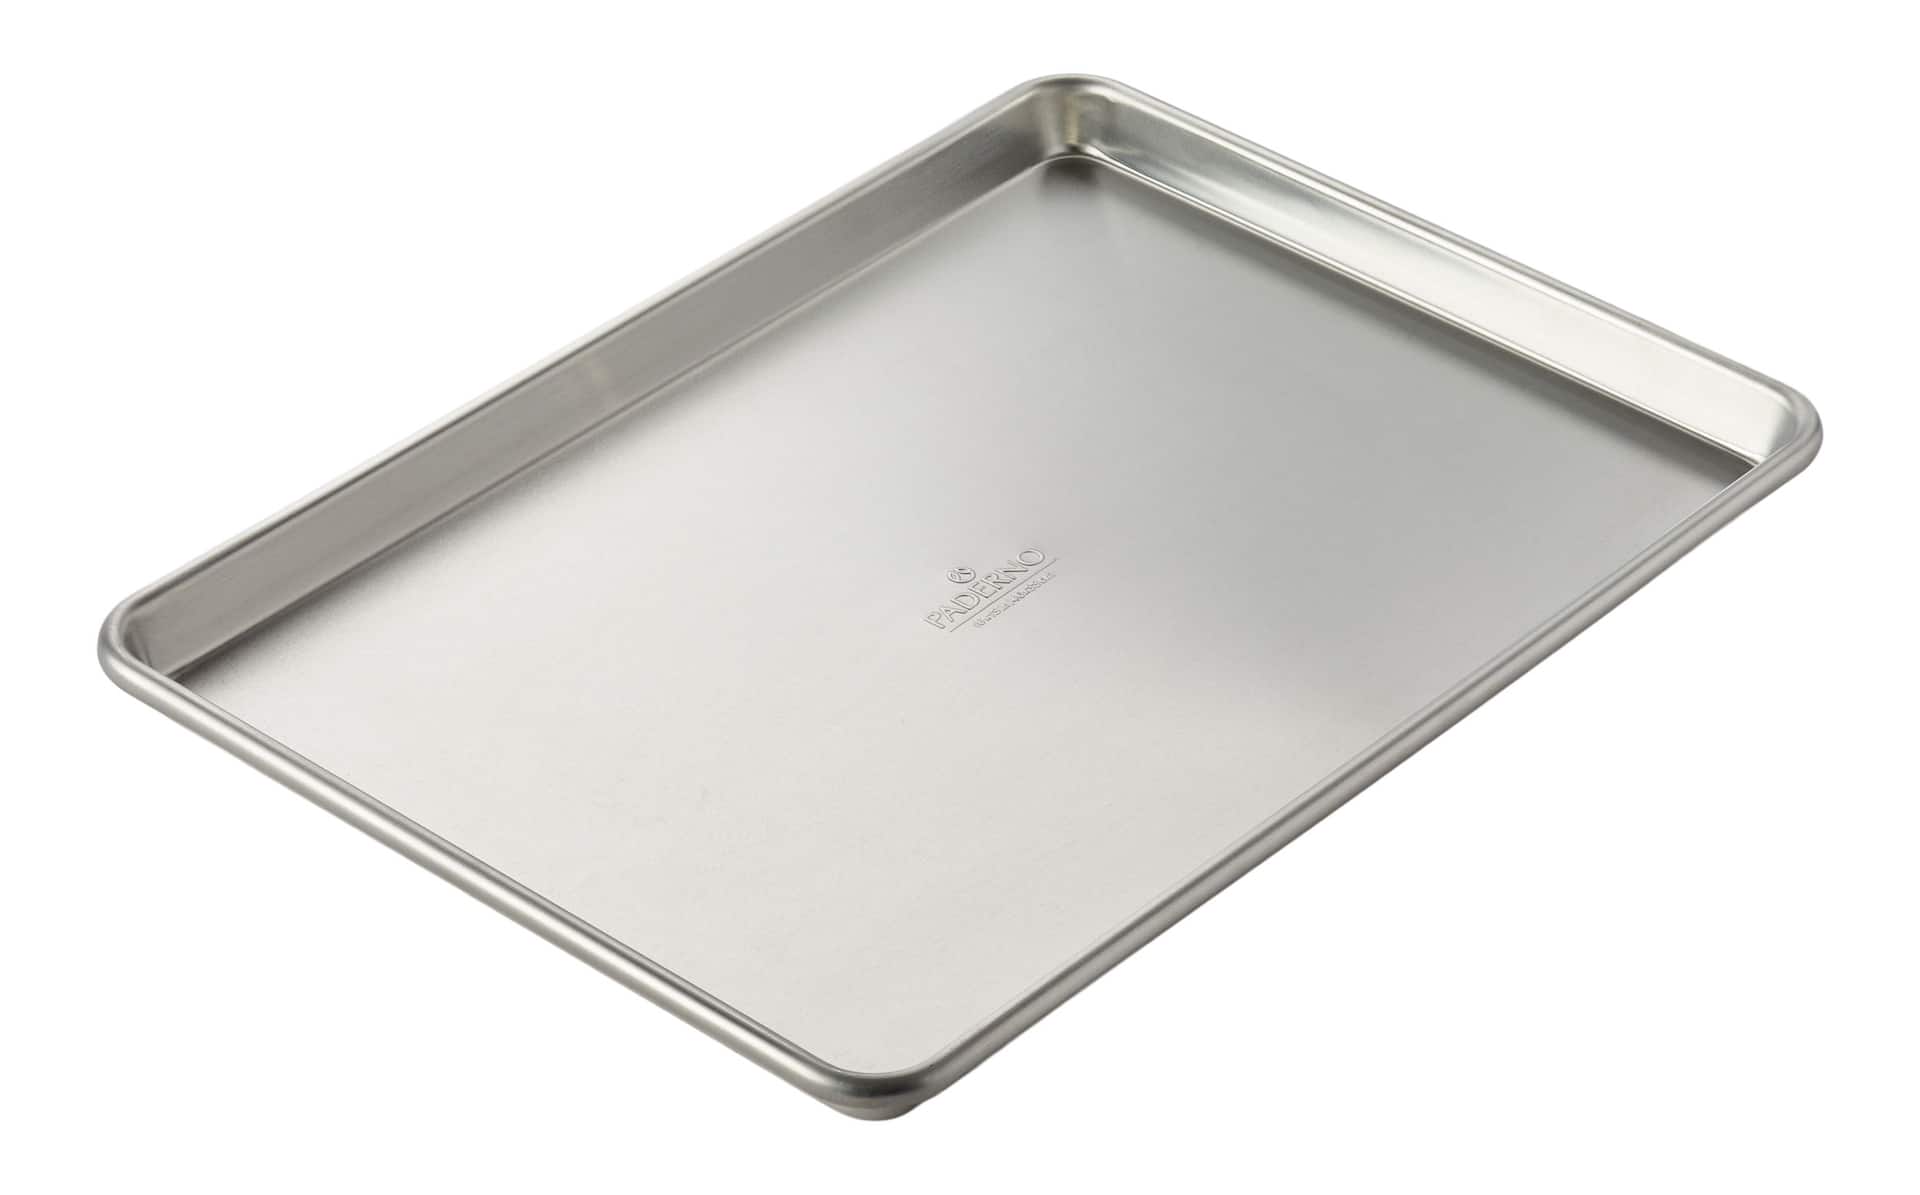 https://media-www.canadiantire.ca/product/living/kitchen/bakeware-baking-prep/1424874/paderno-professional-uncoated-aluminum-half-cookie-sheet-1893be66-325e-4a5f-a103-1473414fd385-jpgrendition.jpg